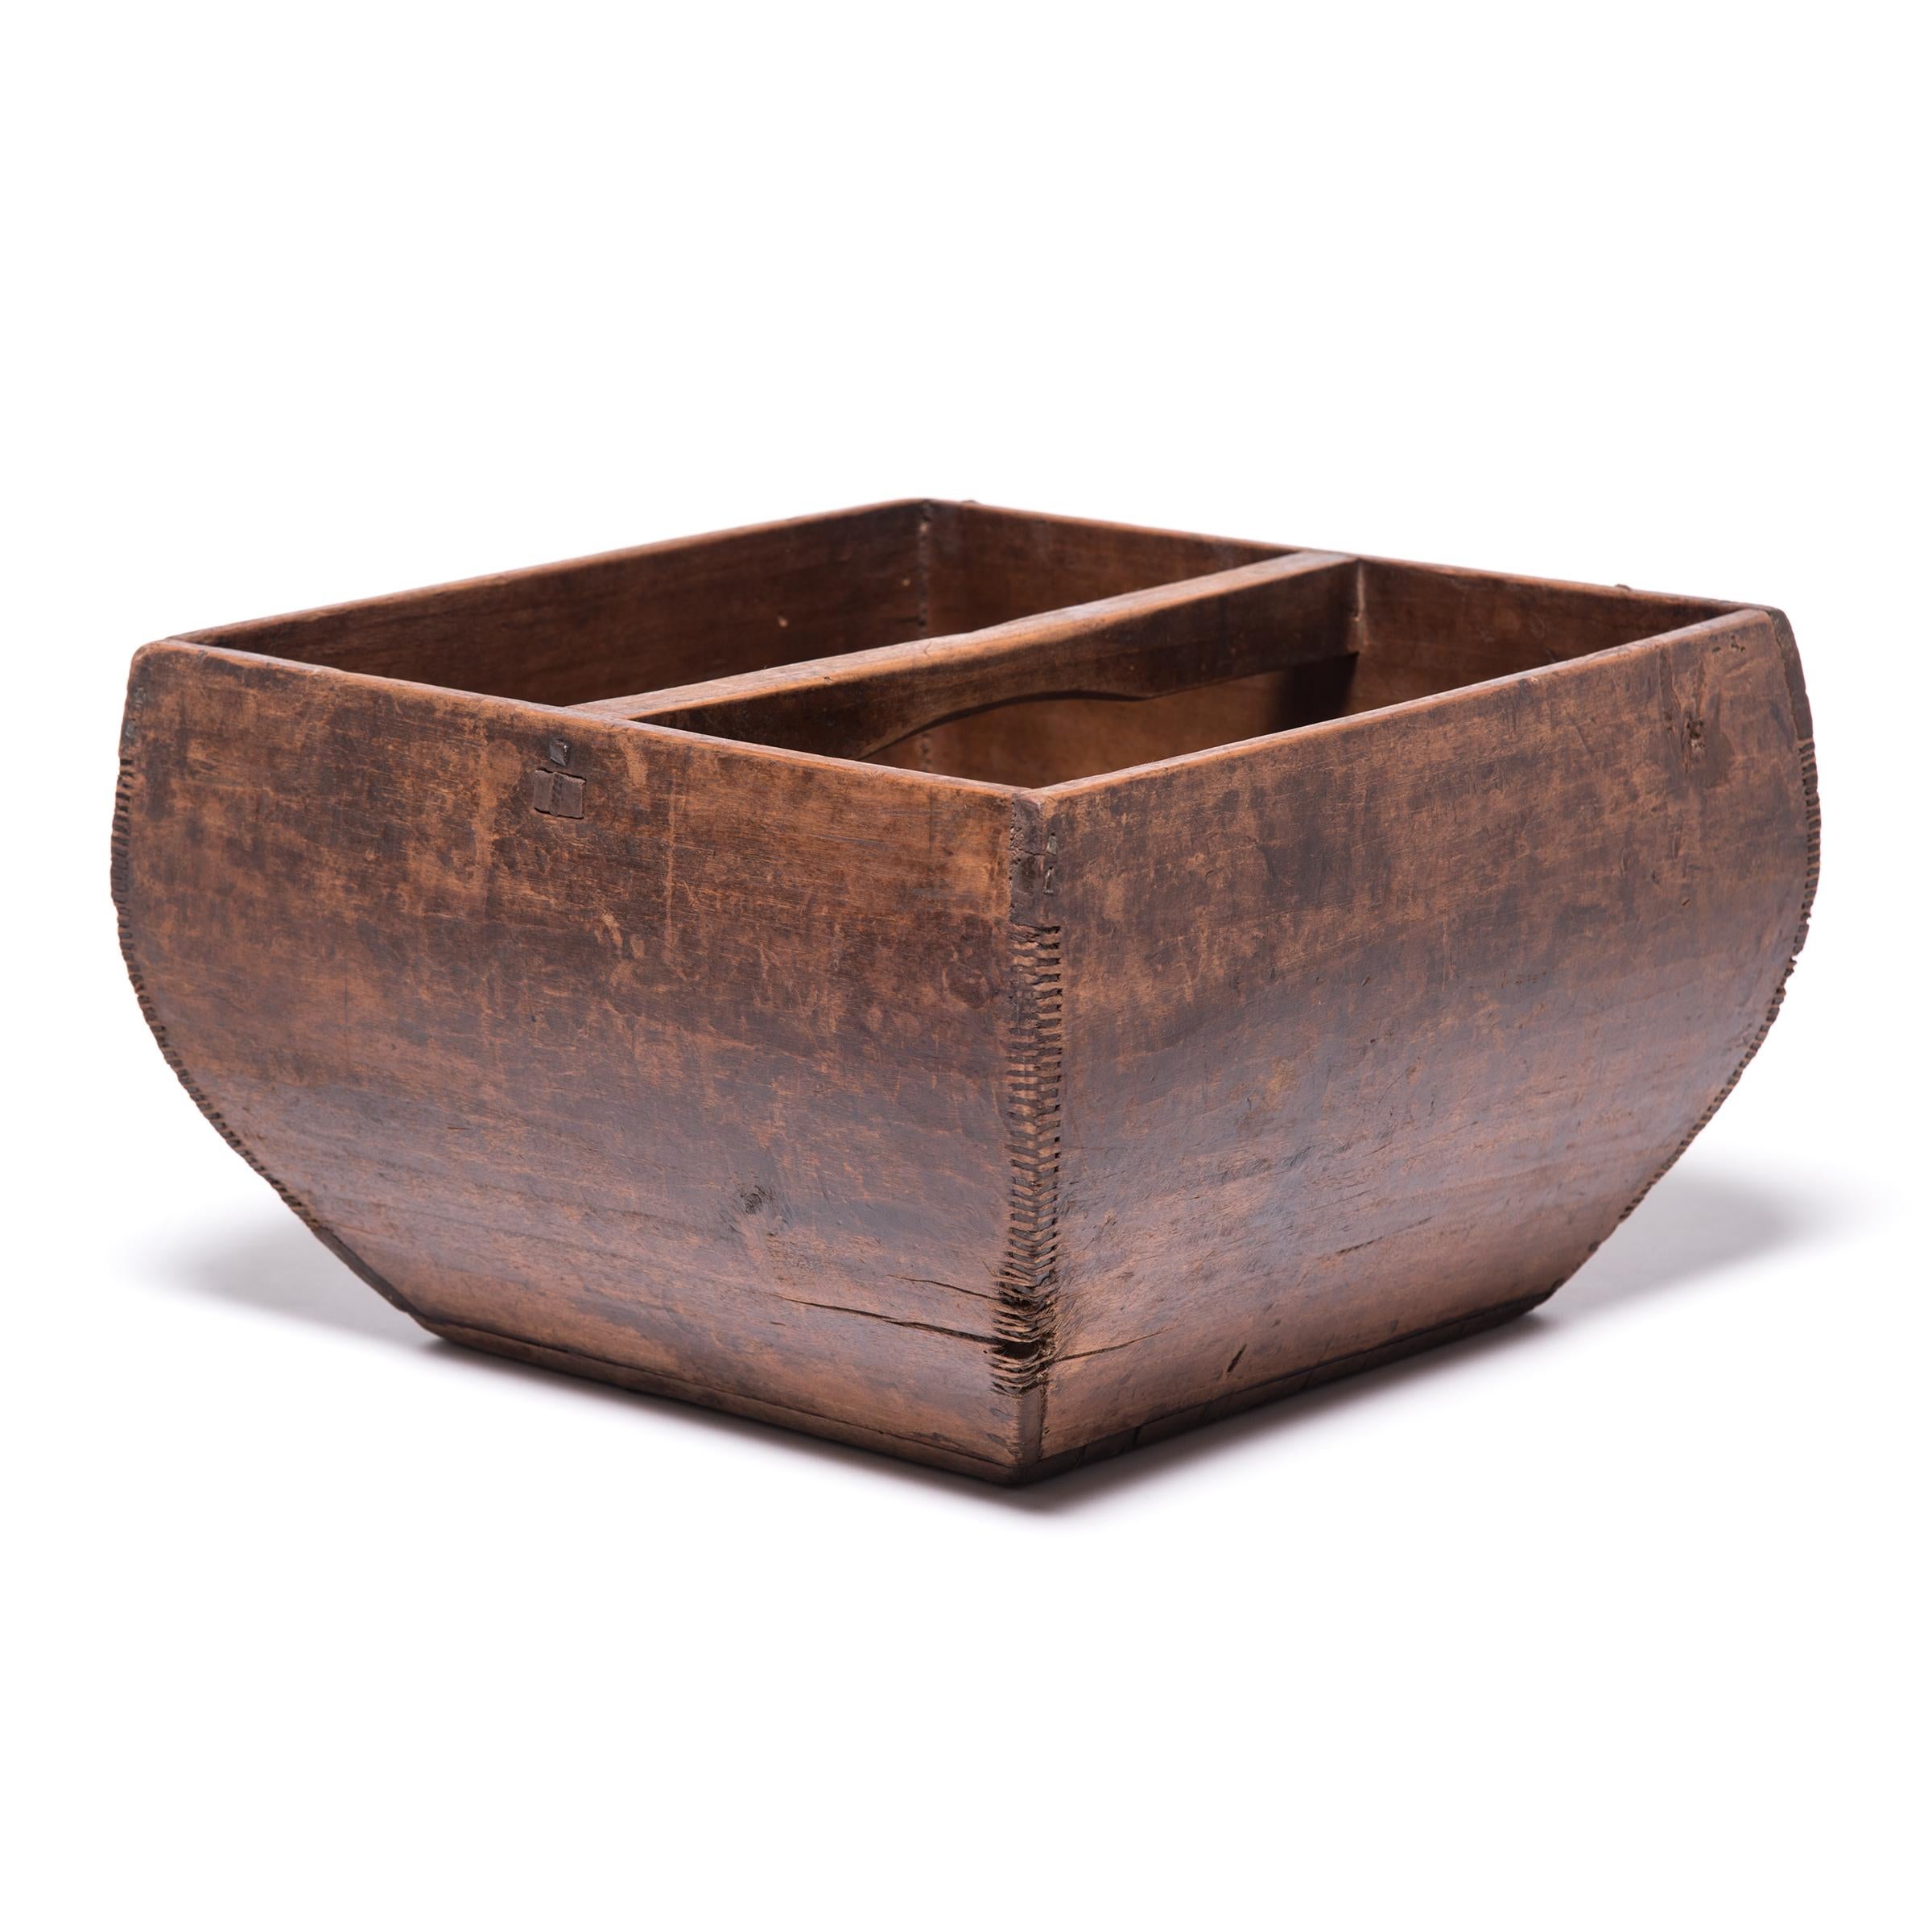 This rustic container was made over a hundred years ago to measure and hold a dou of rice, an ancient Chinese measurement. Hand-crafted of pine wood, the vessel has gracefully swelling sides and a straight handle burnished from the touch of many